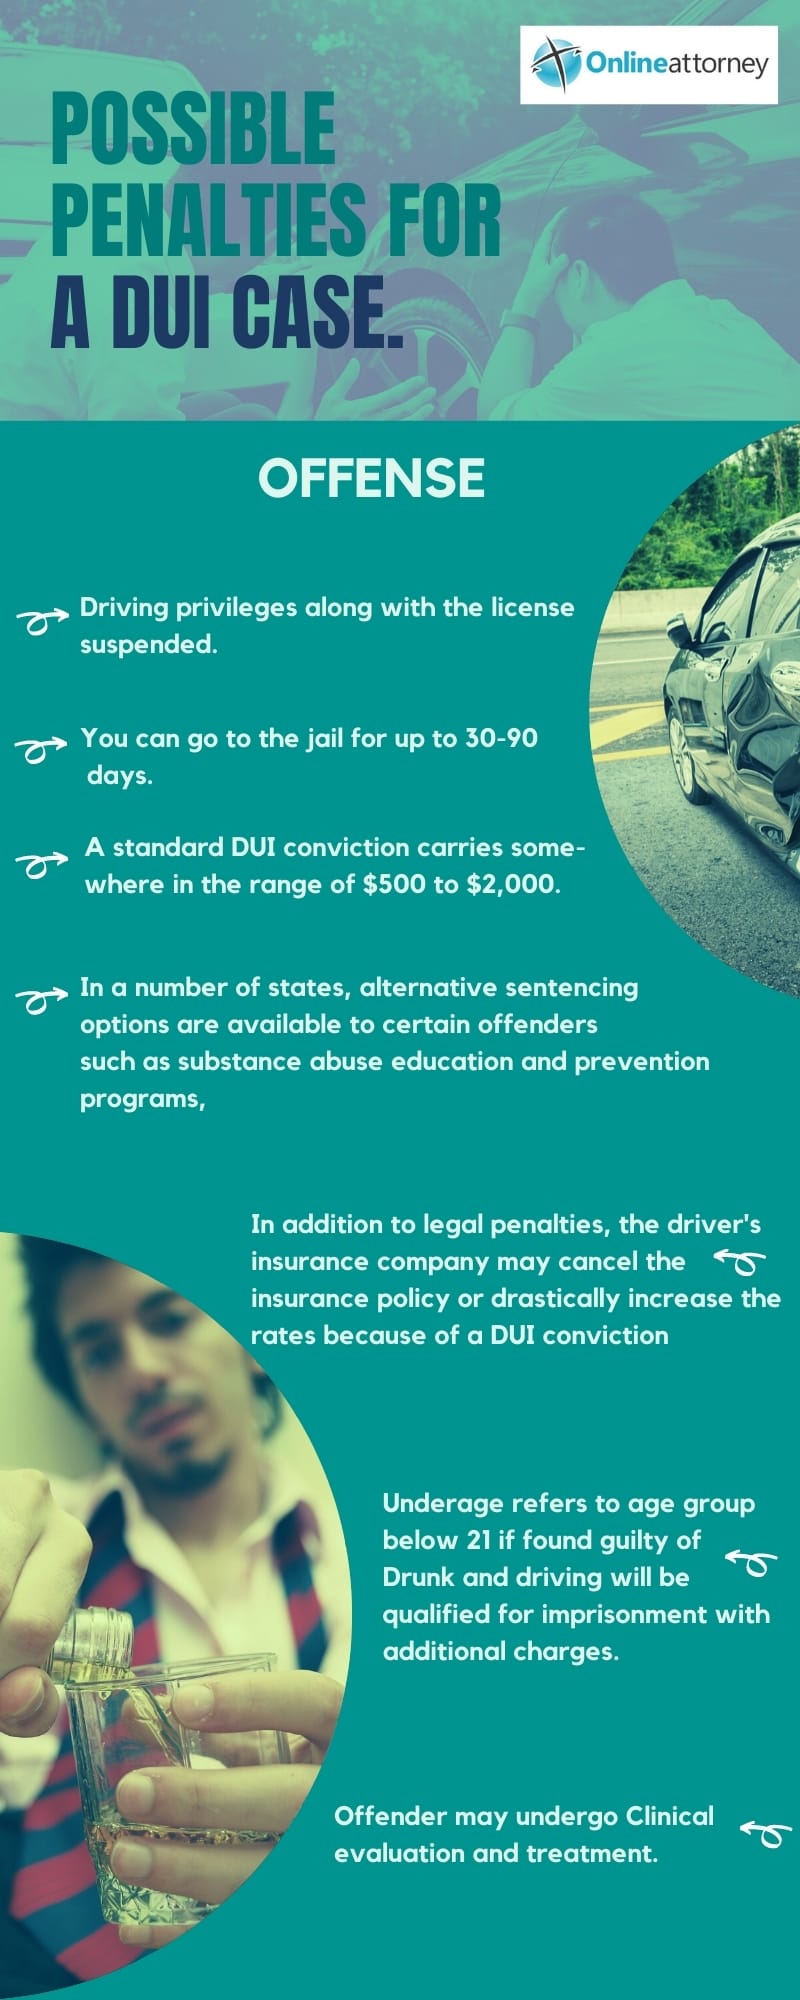 Possible penalties for a DUI case